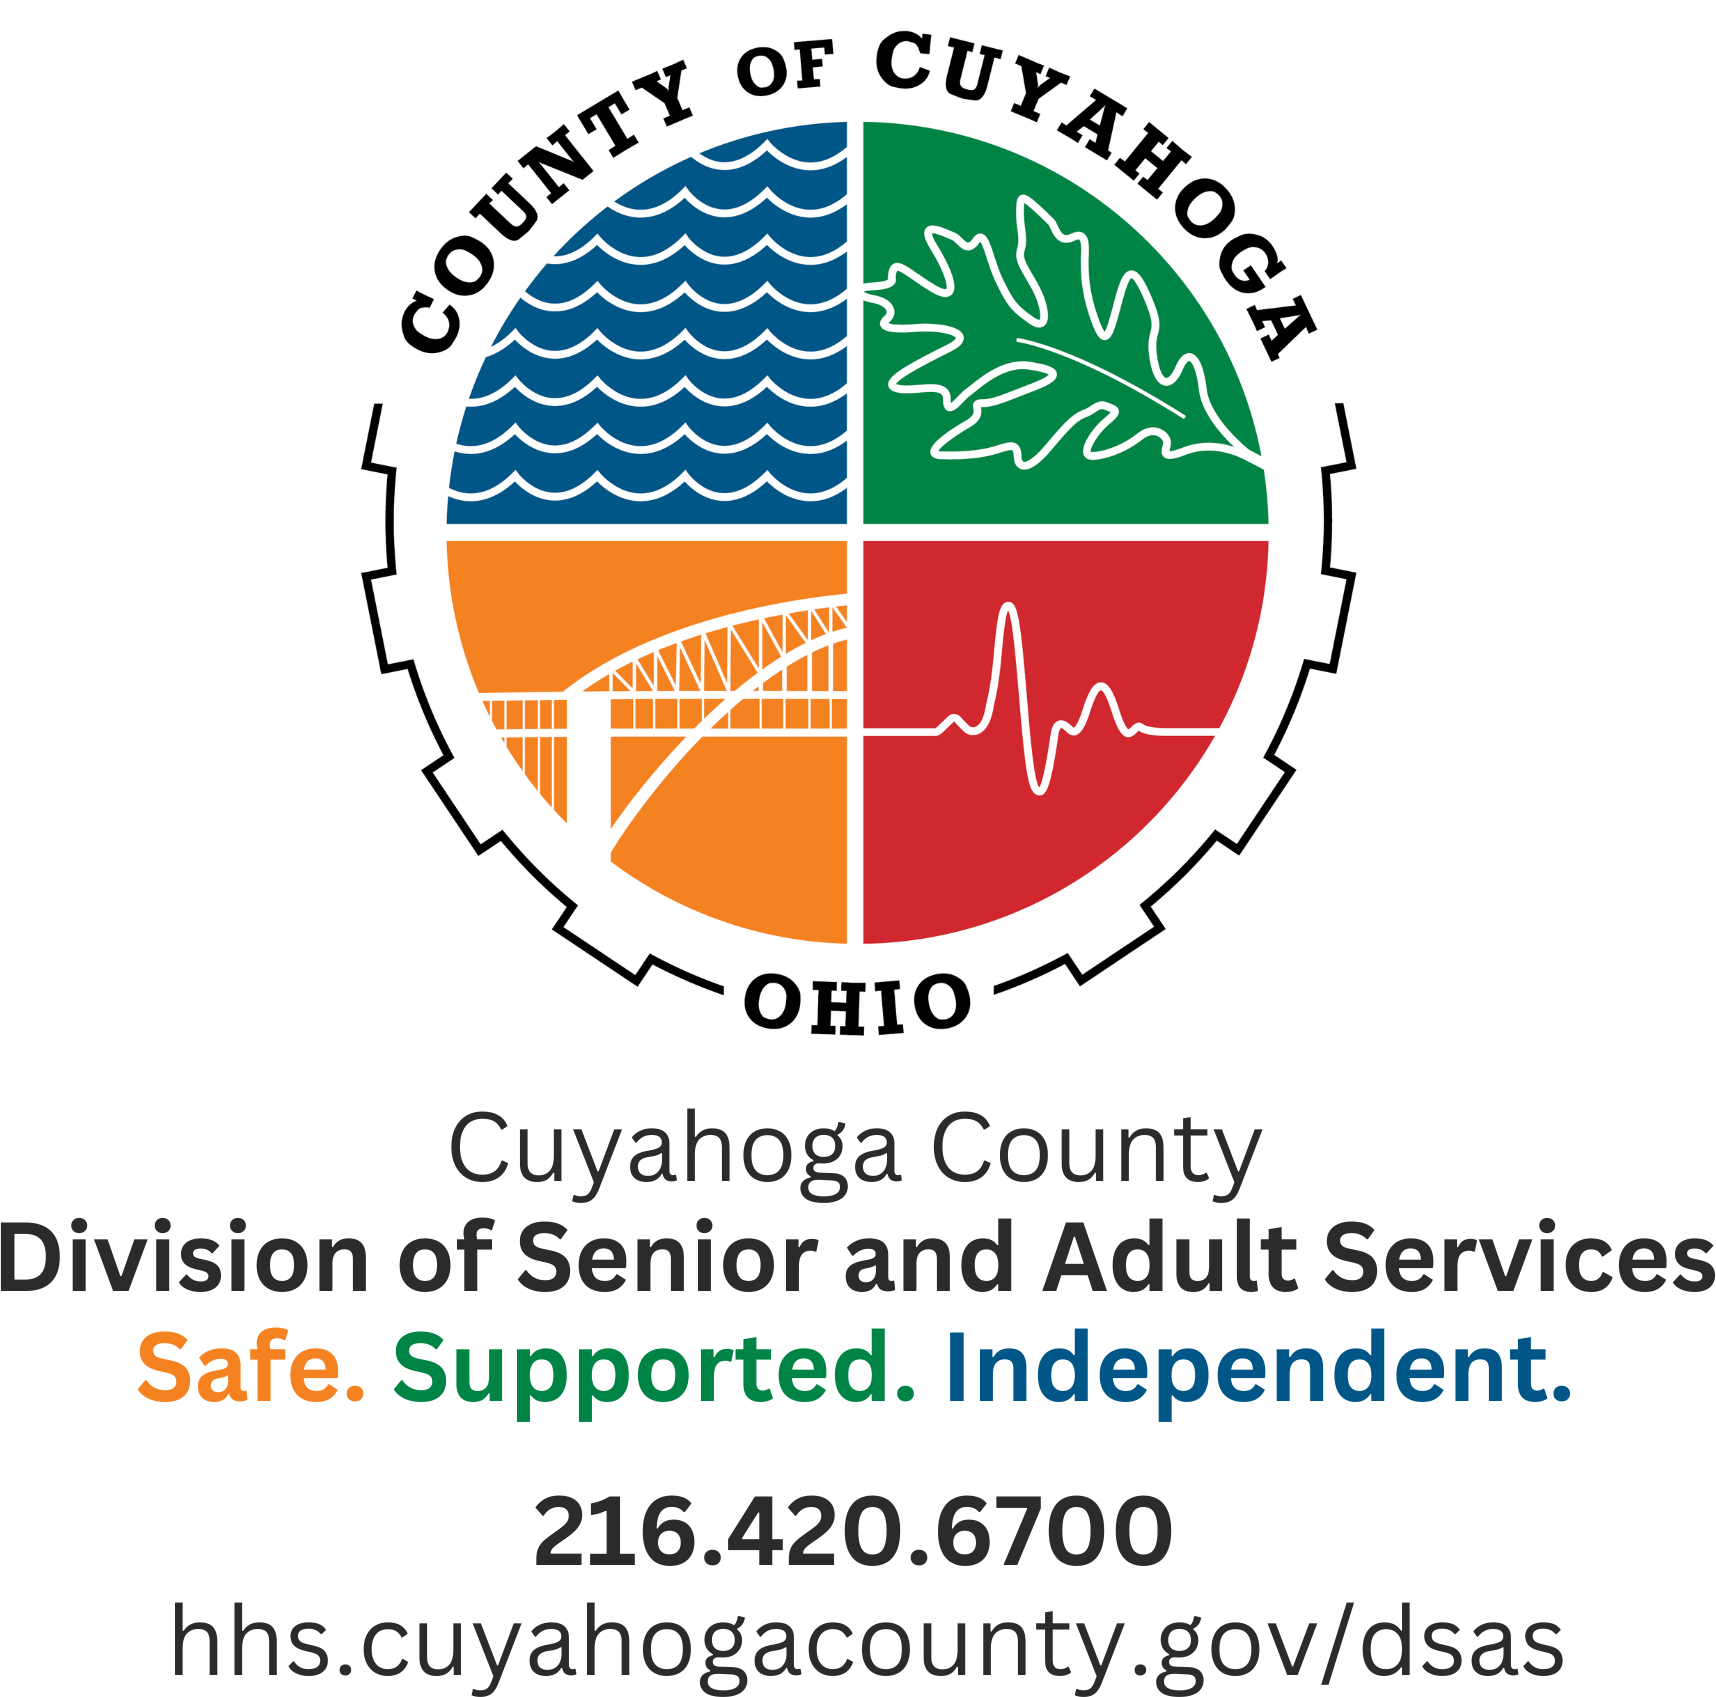 Cuyahoga County Division of Adult and Senior Services